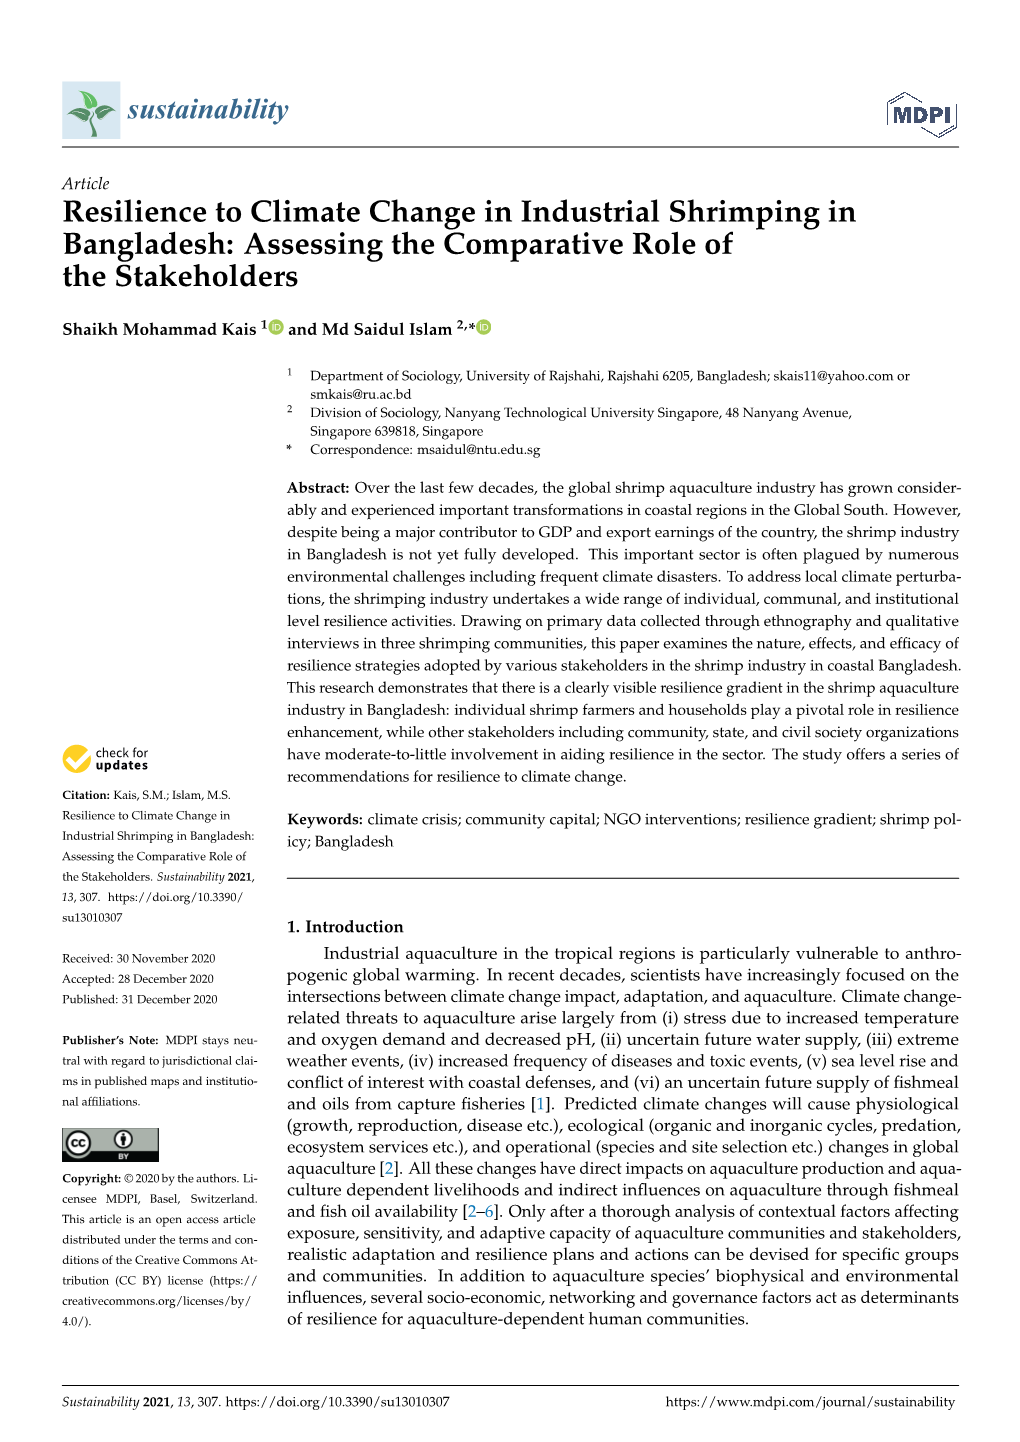 Resilience to Climate Change in Industrial Shrimping in Bangladesh: Assessing the Comparative Role of the Stakeholders